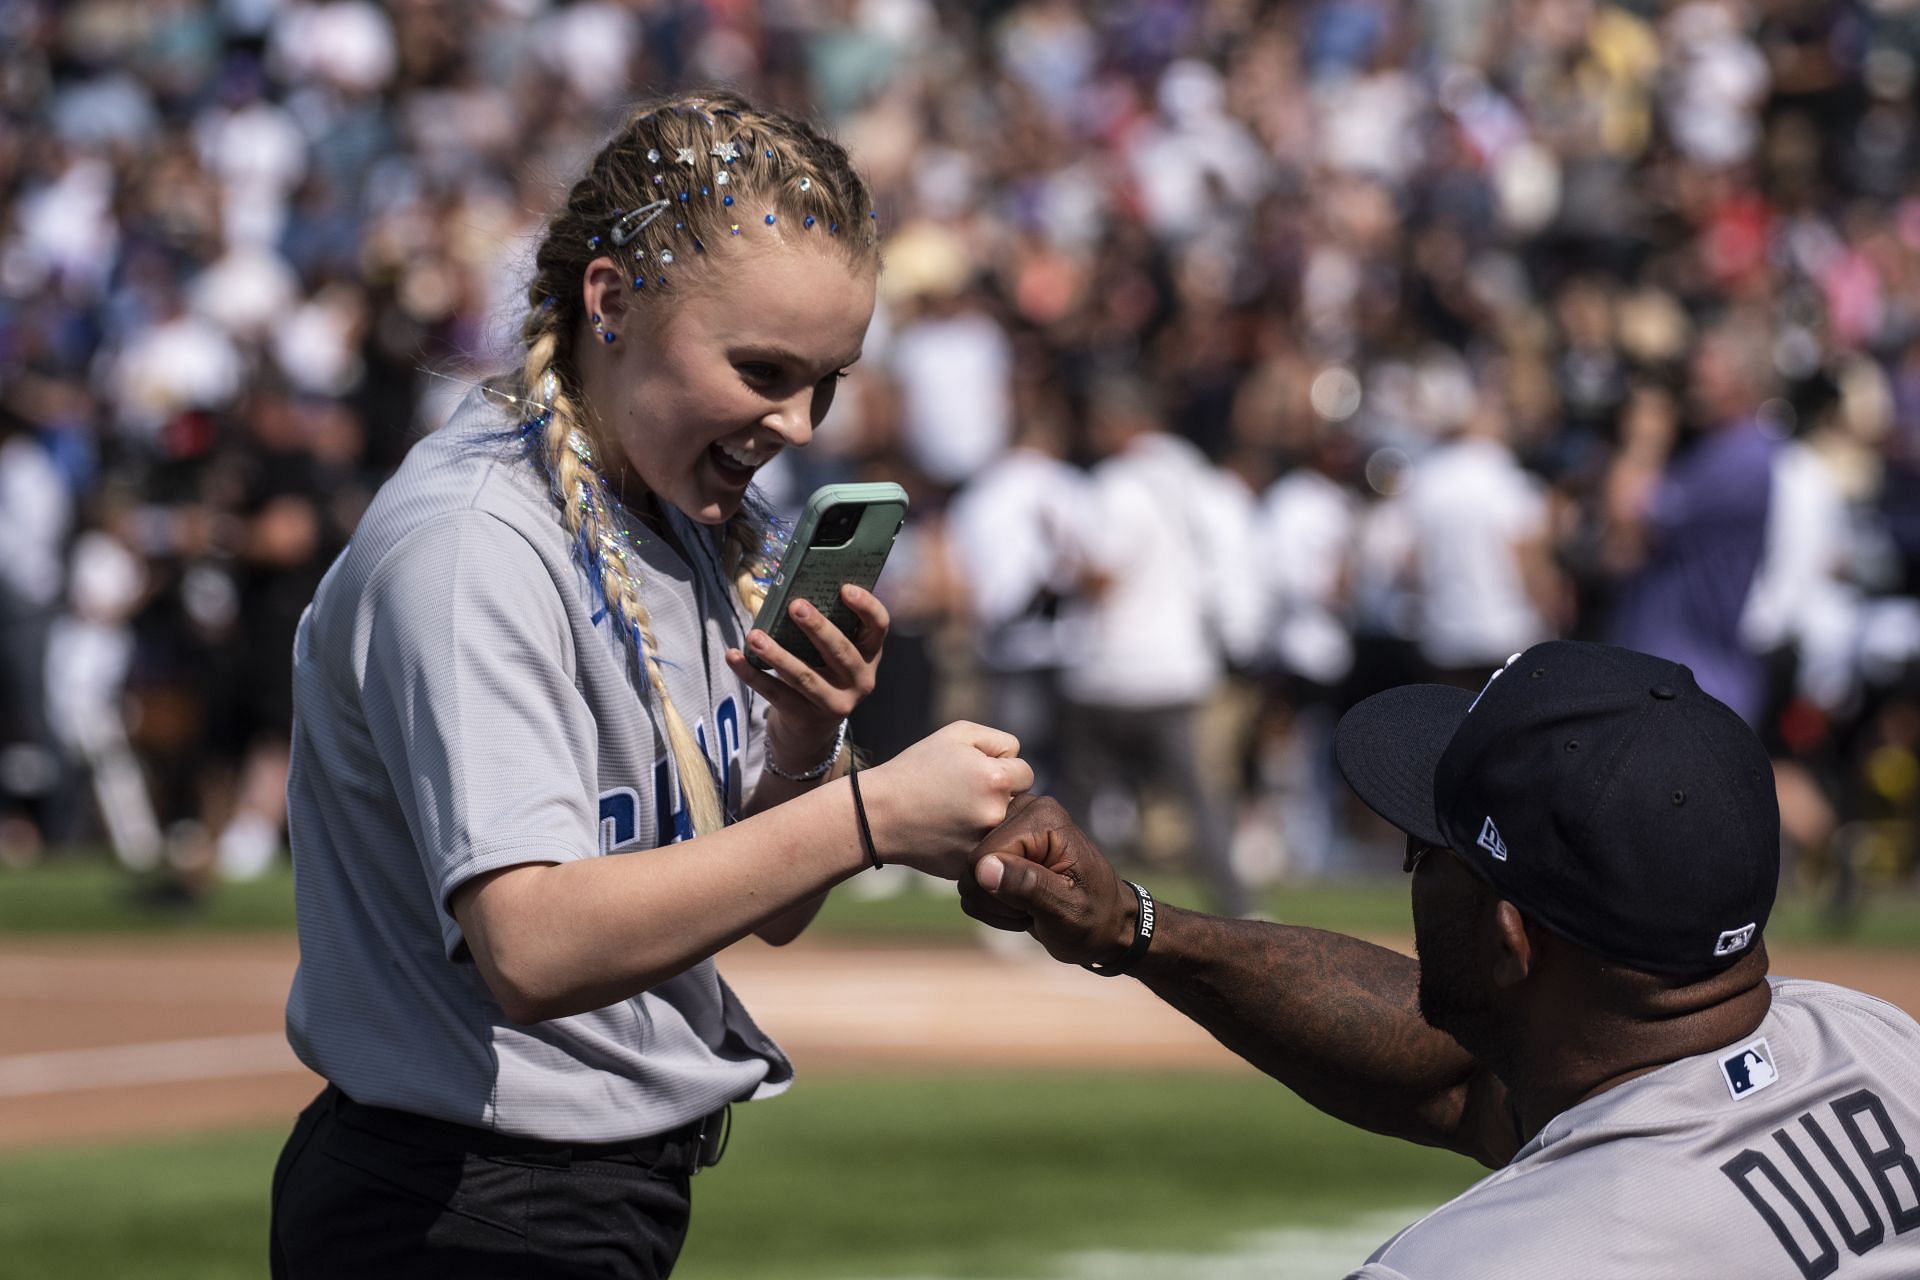 Def Noodles on X: BREAKING NEWS THAT WILL MOST DEFINITELY CHANGE YOUR  LIFE: JoJo Siwa trending after dominating in the MLB All-Star Celebrity  Softball Game. JoJo hit a double off Quavo. Also